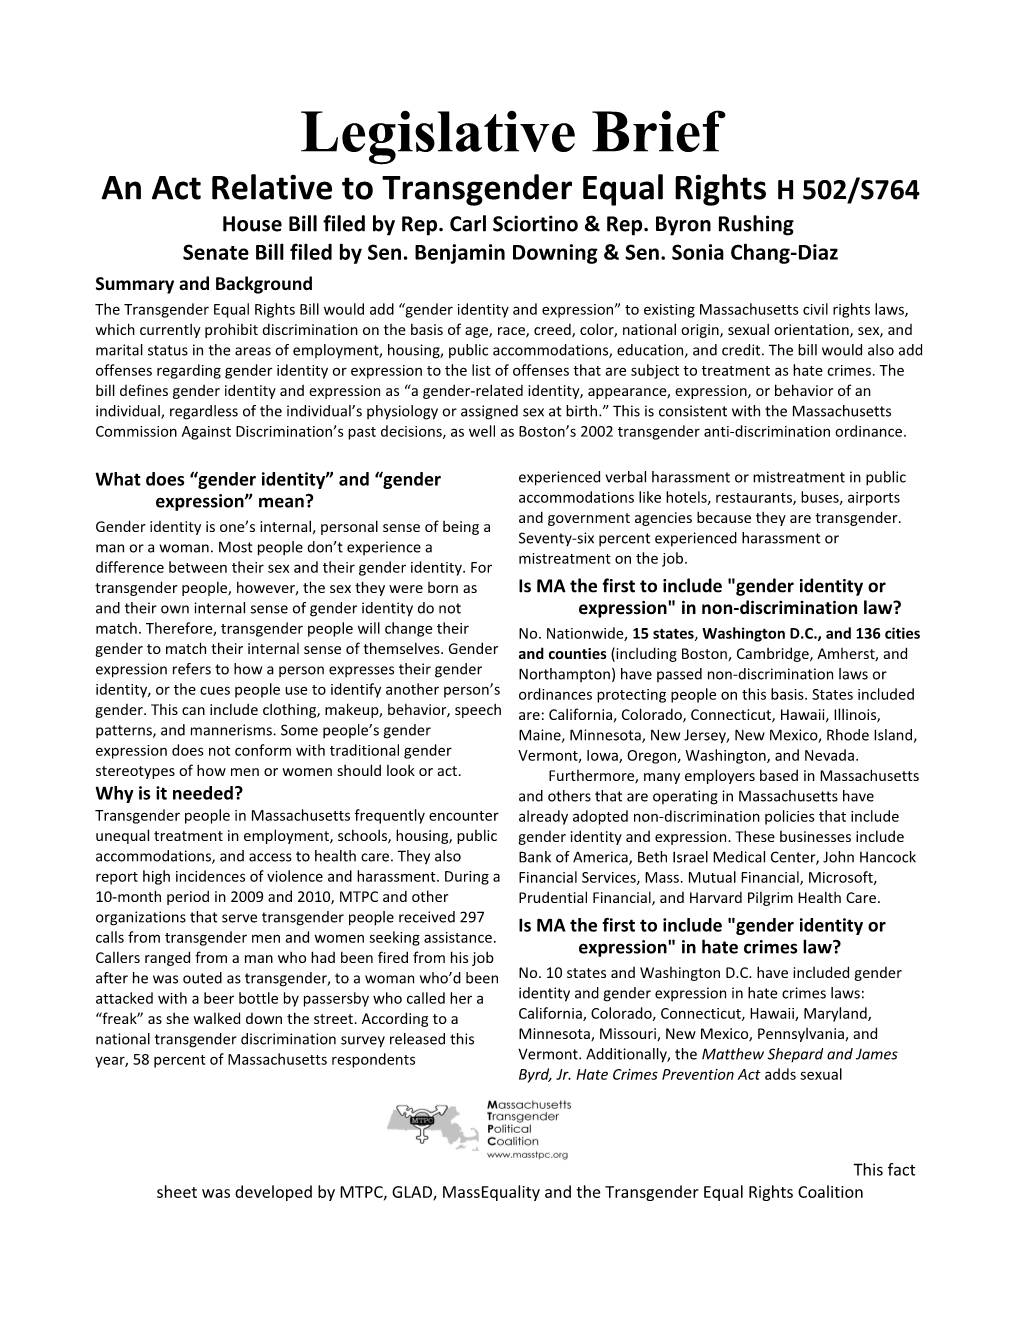 An Act Relative to Transgender Equal Rightsh 502/S764